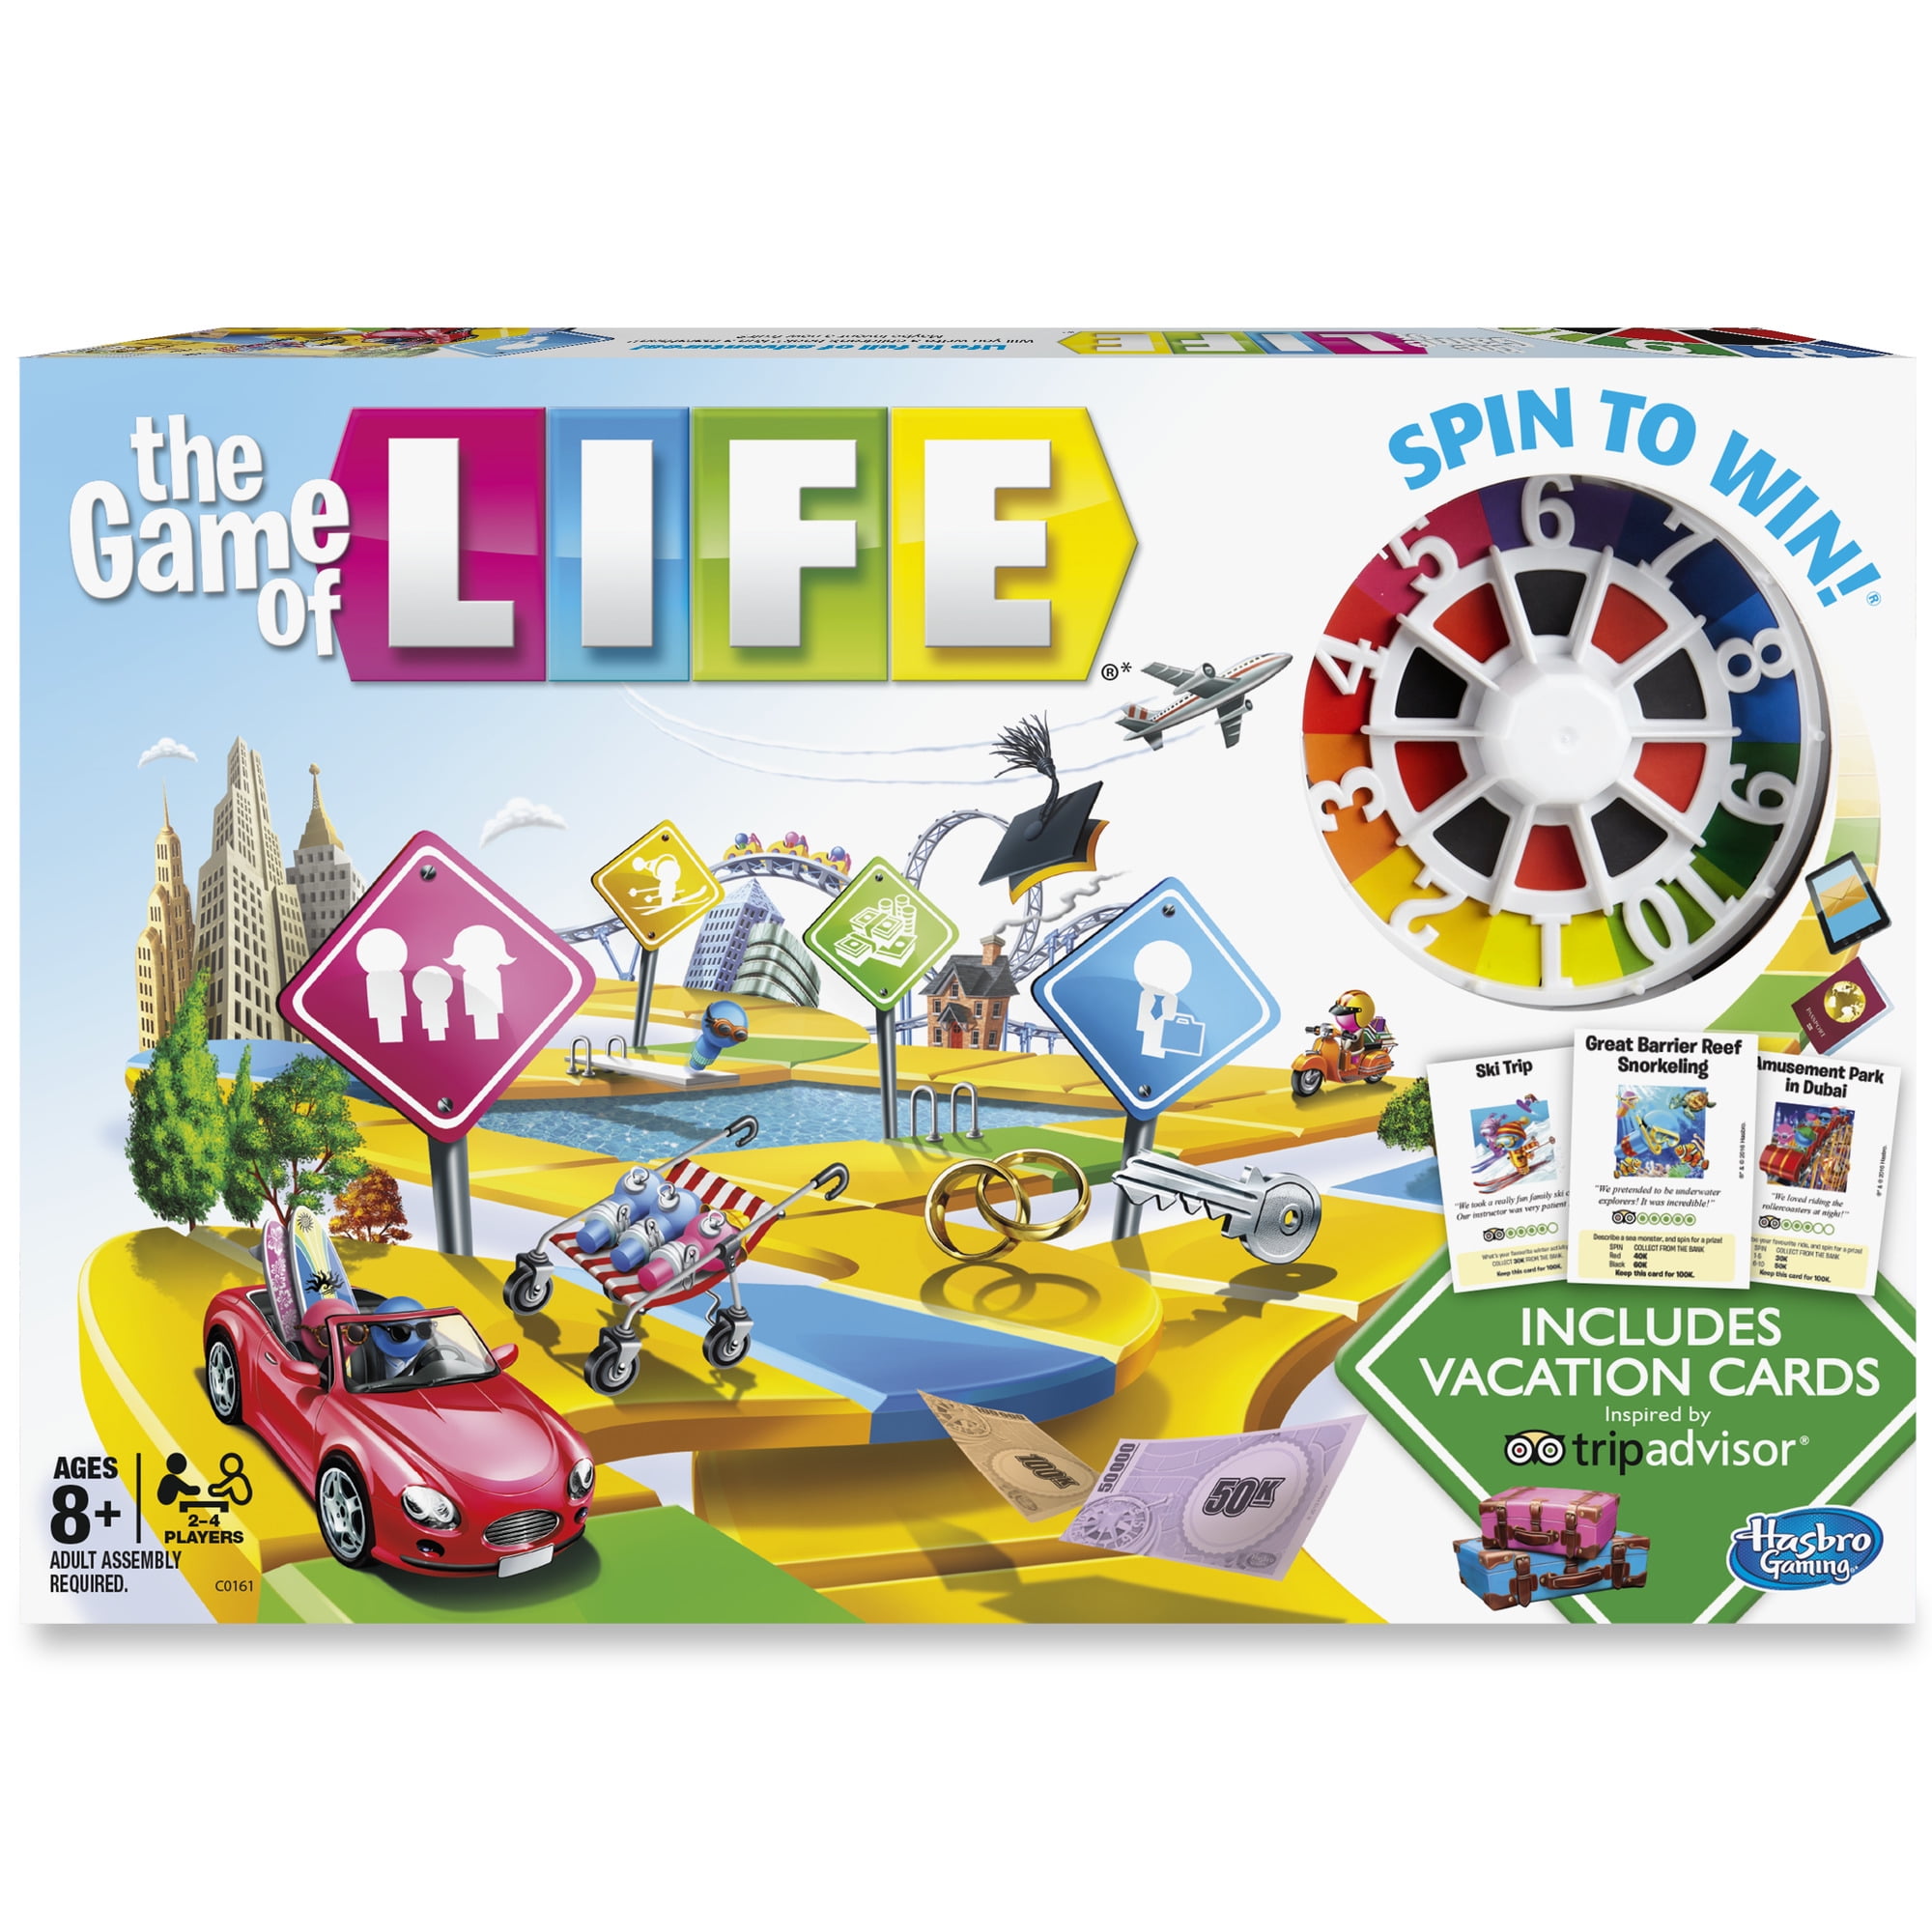 The Game of Life on the App Store